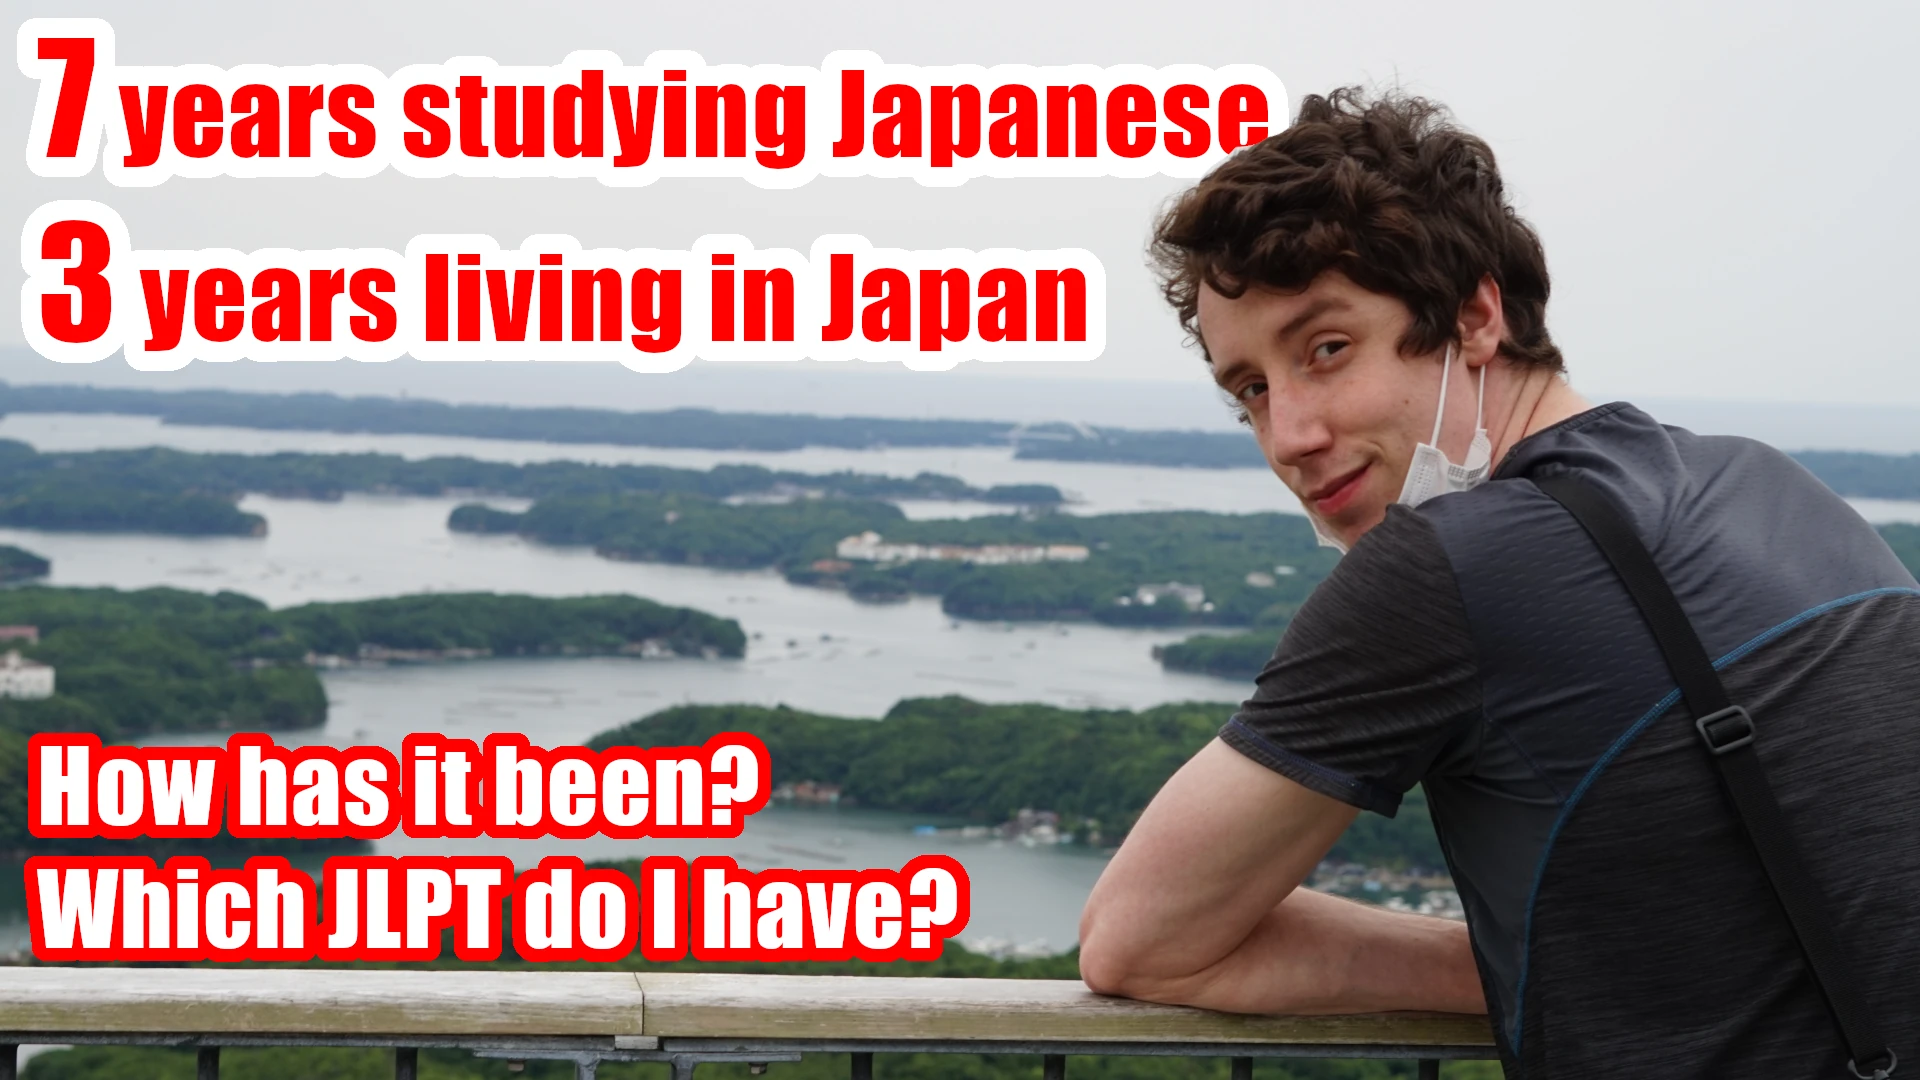 3 Years Living in Japan – How’s my life and Japanese?